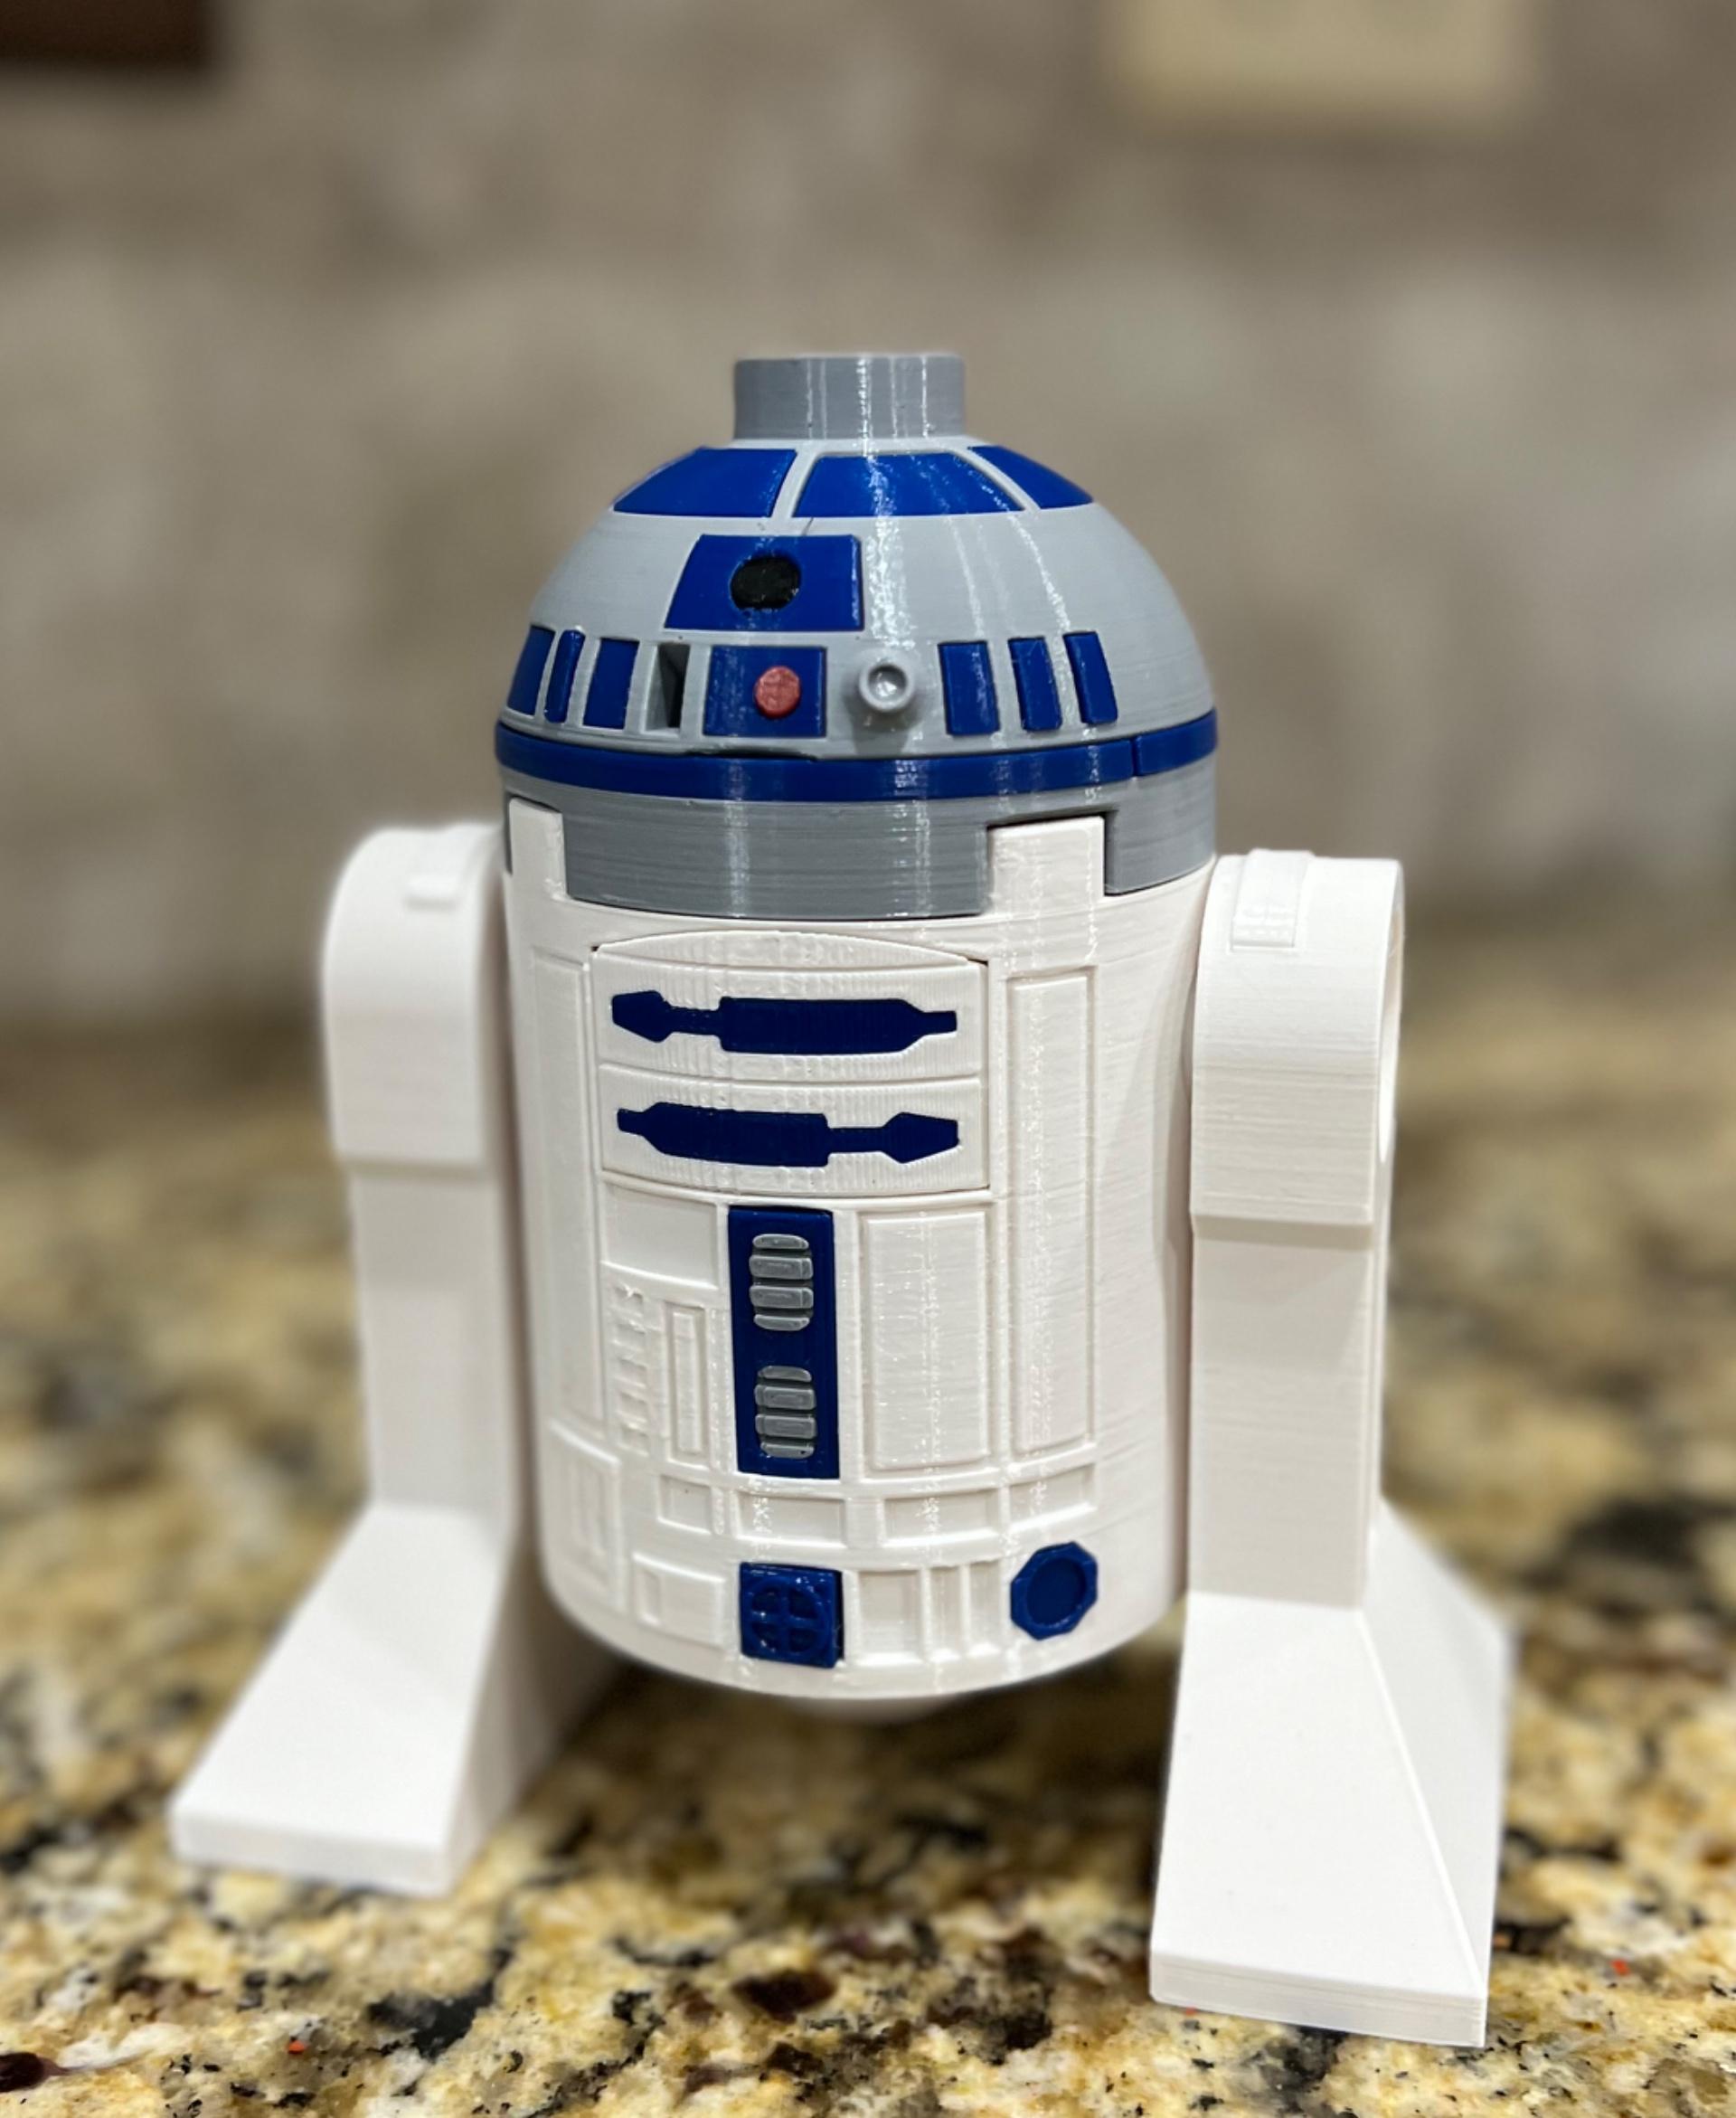 R2-D2 (6:1 LEGO-inspired brick figure, NO MMU/AMS, NO supports, NO glue) - Love this one.  - 3d model